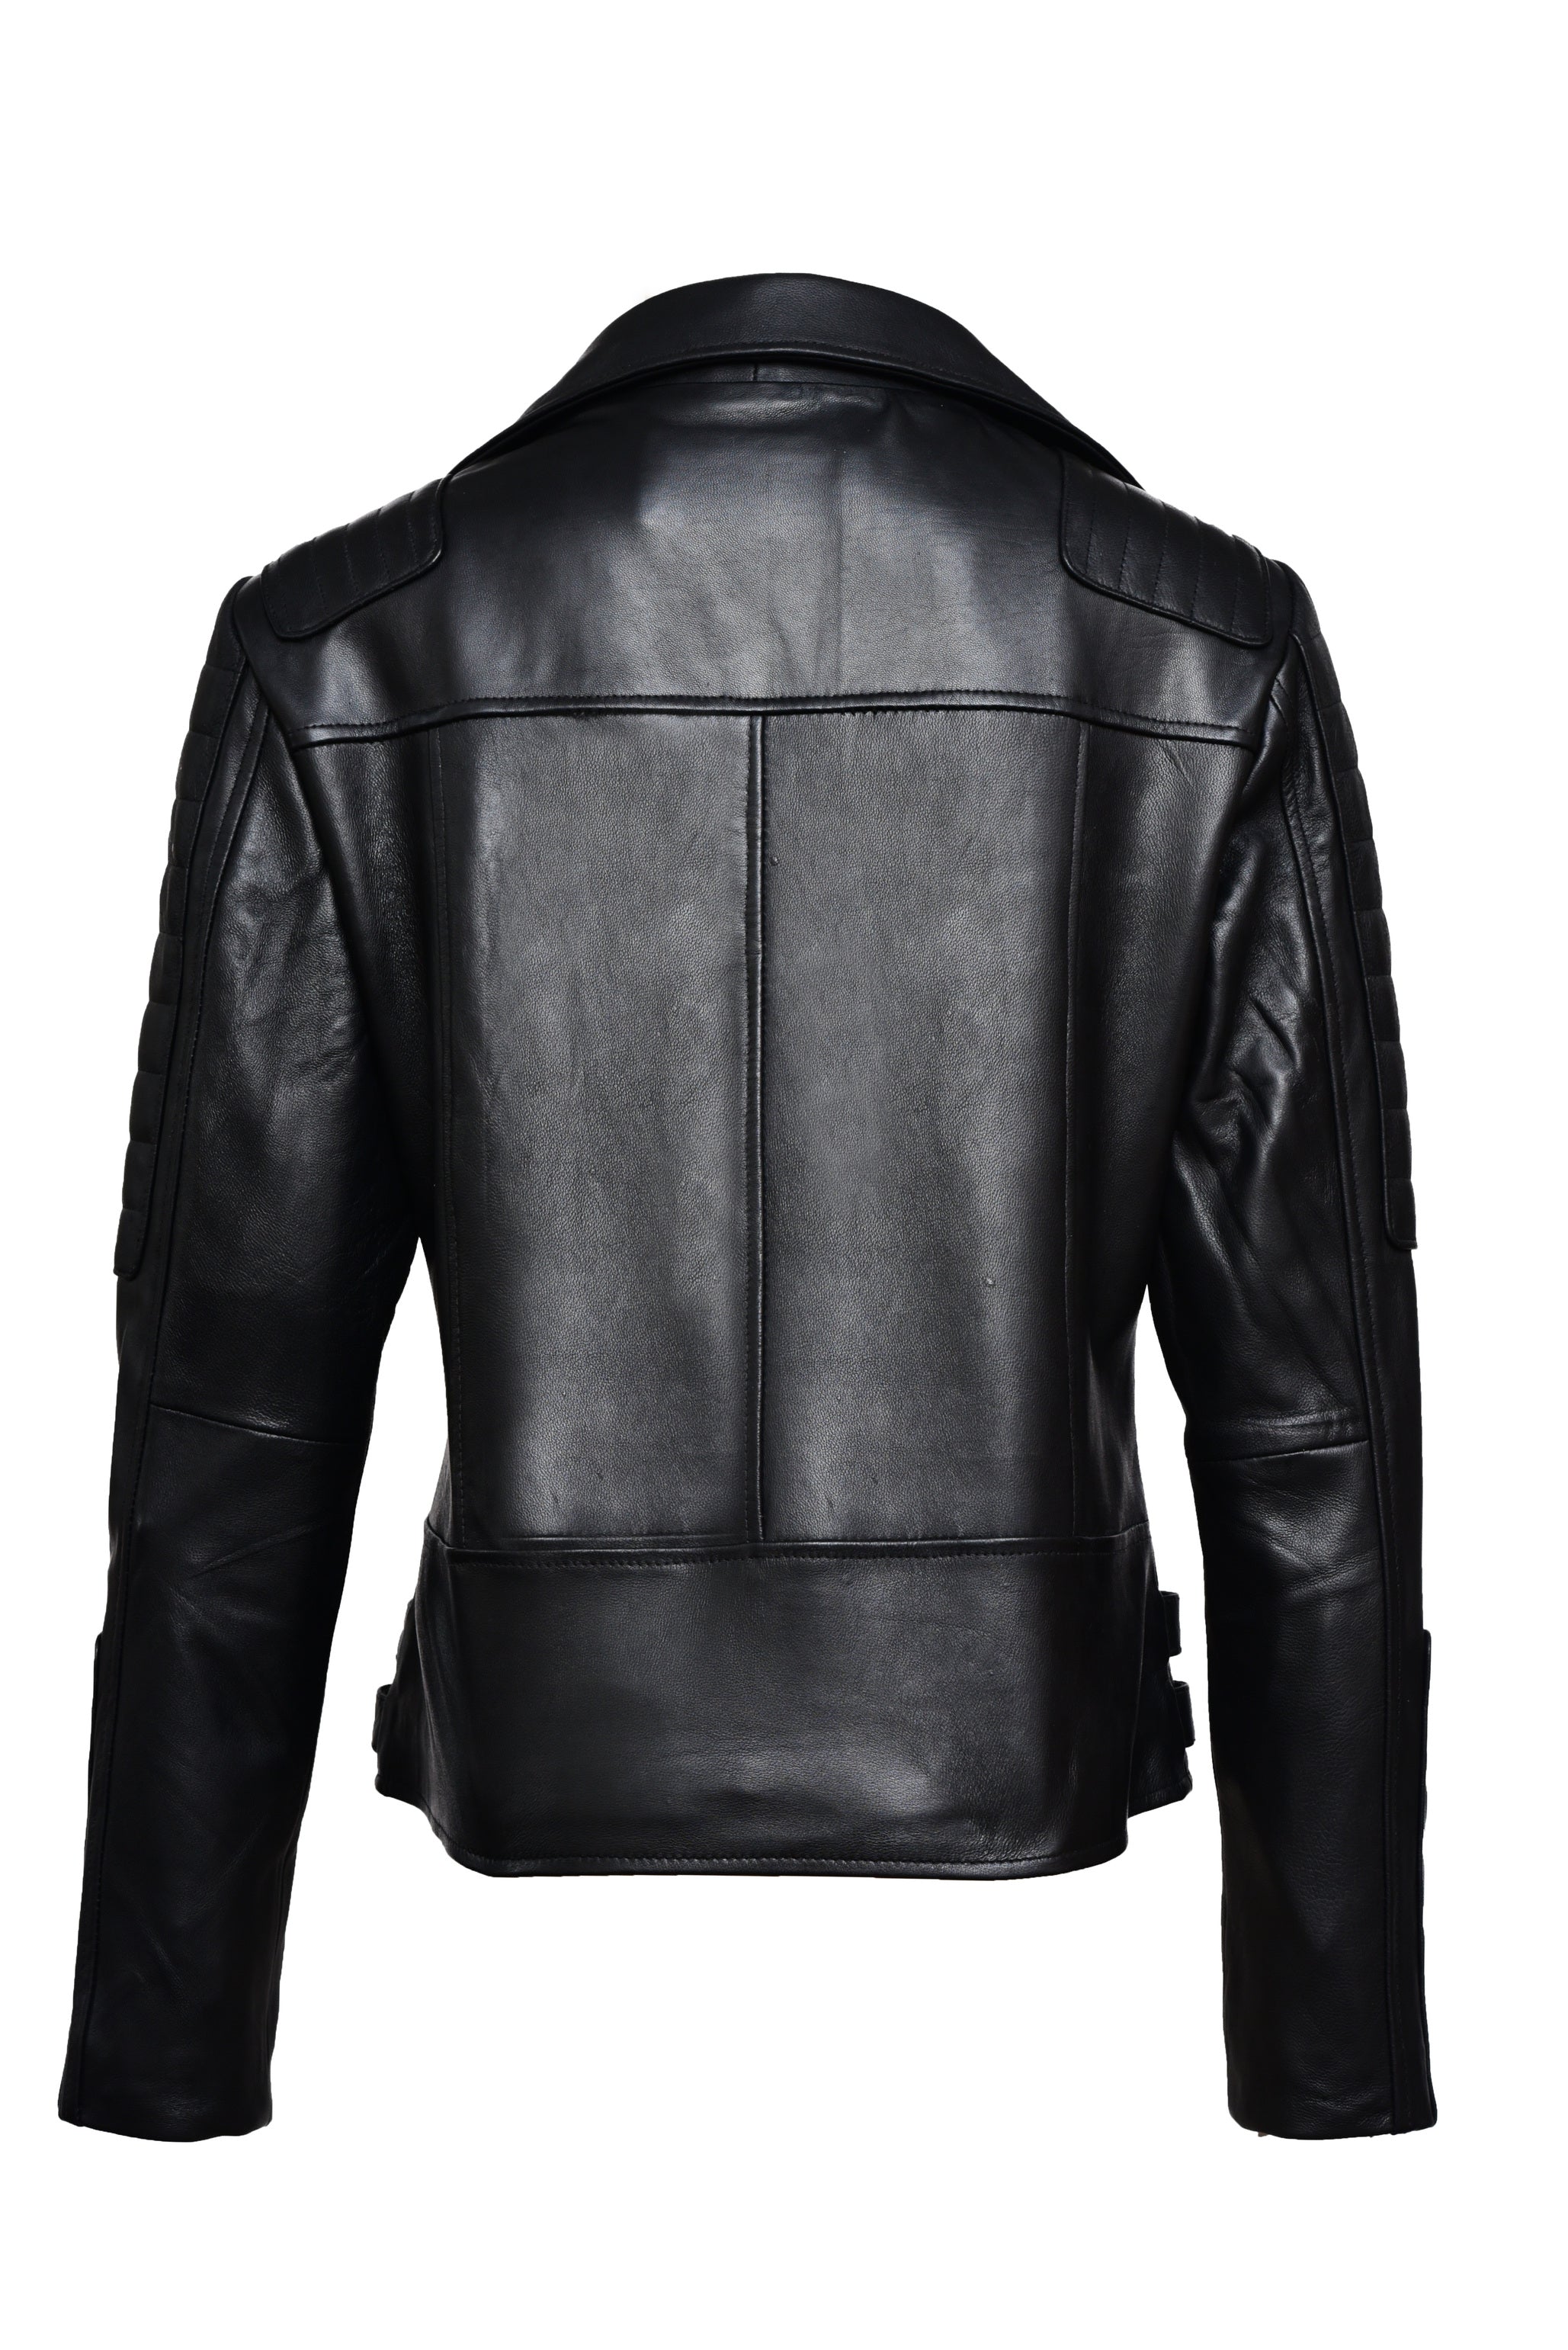 Maintaining, Cleaning and Storing a Leather Motorcycle Jacket - Rhinoleather